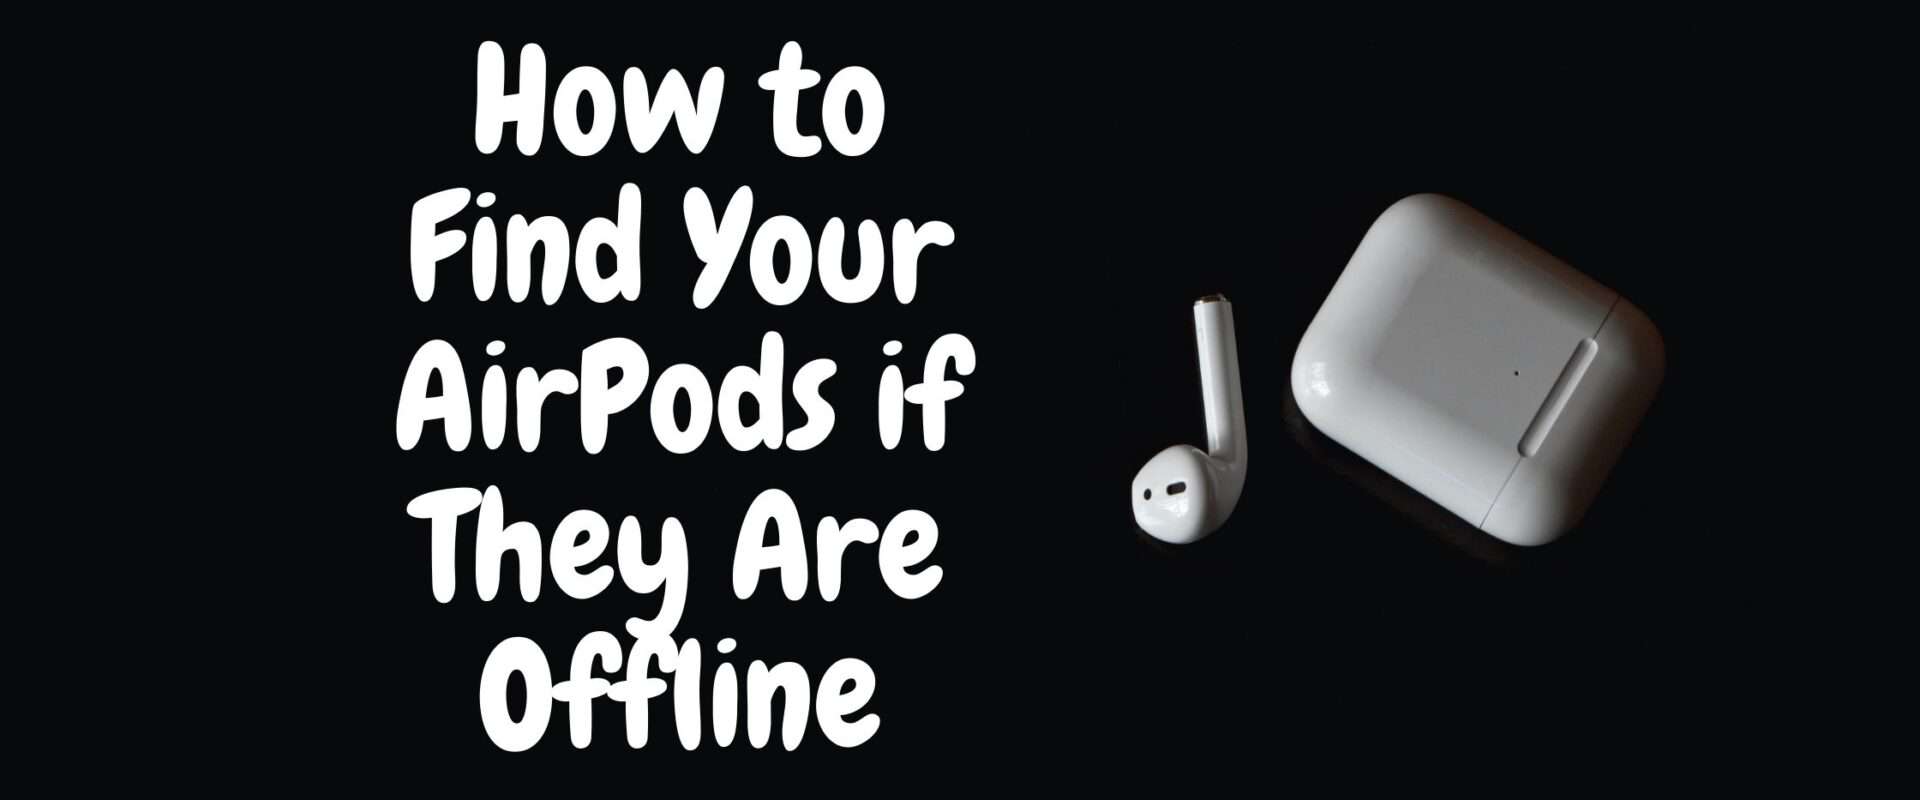 How to Find Your AirPods if They Are Offline